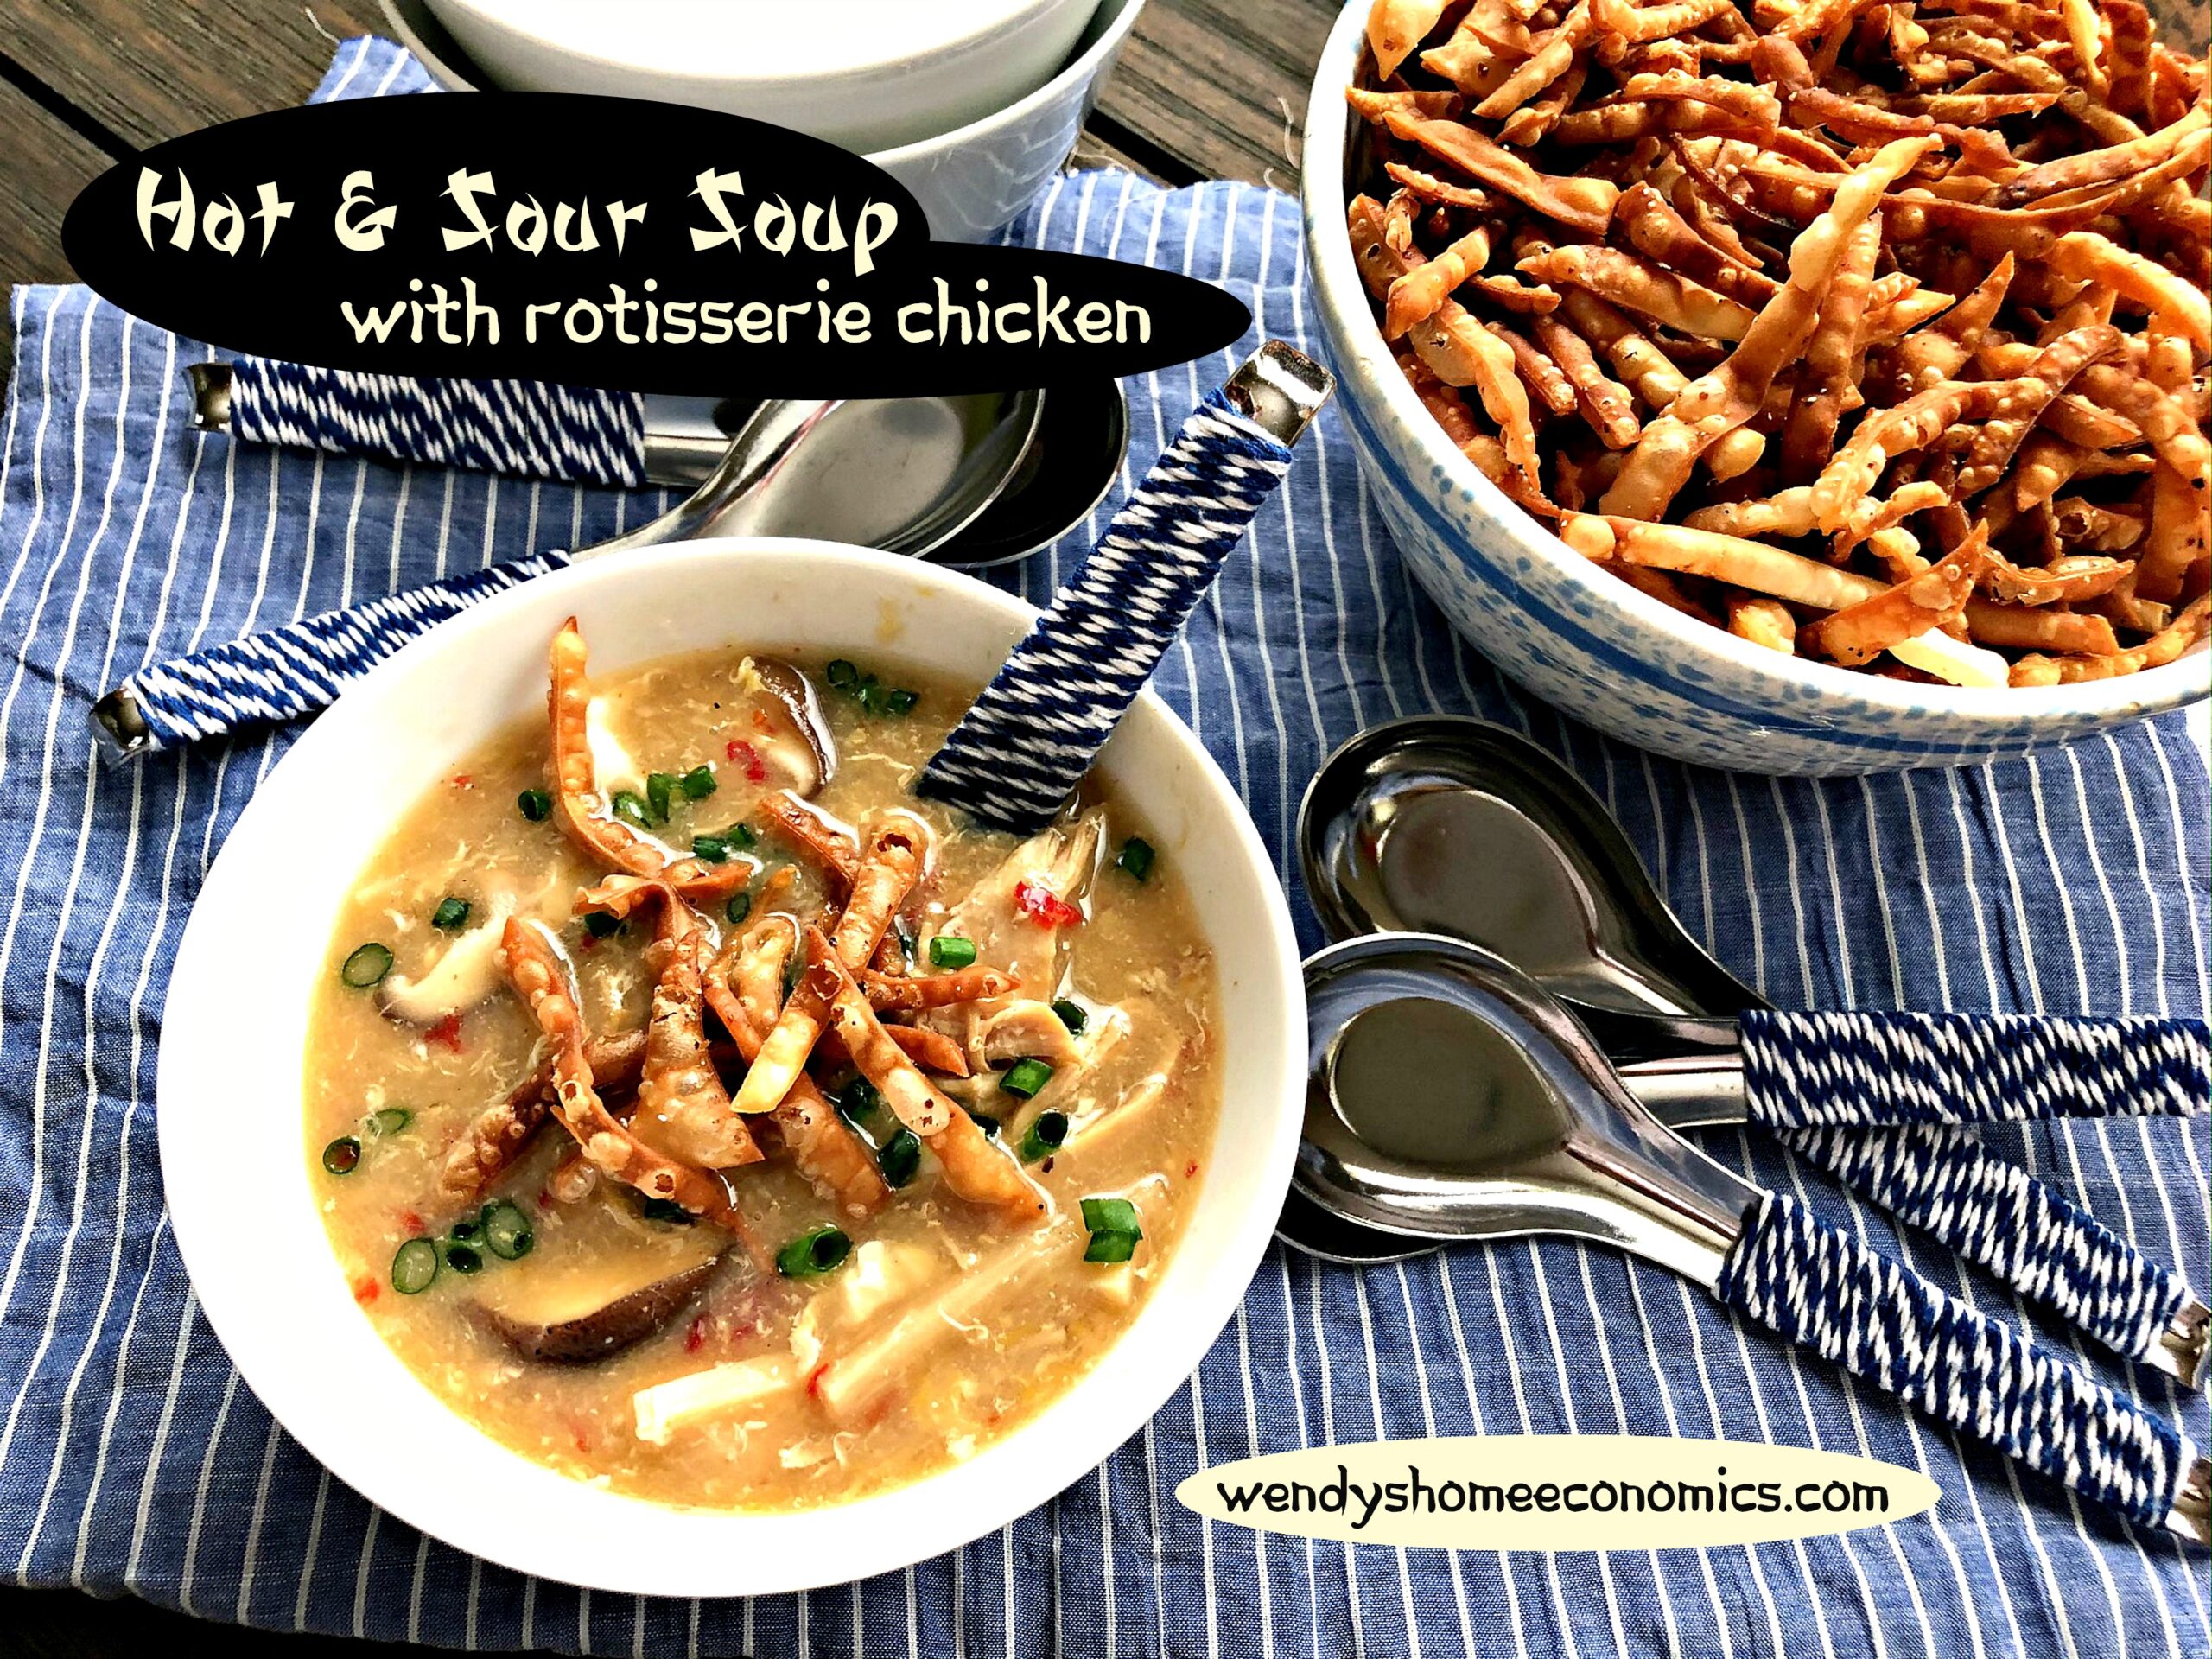 Hot and Sour Soup with Rotisserie Chicken